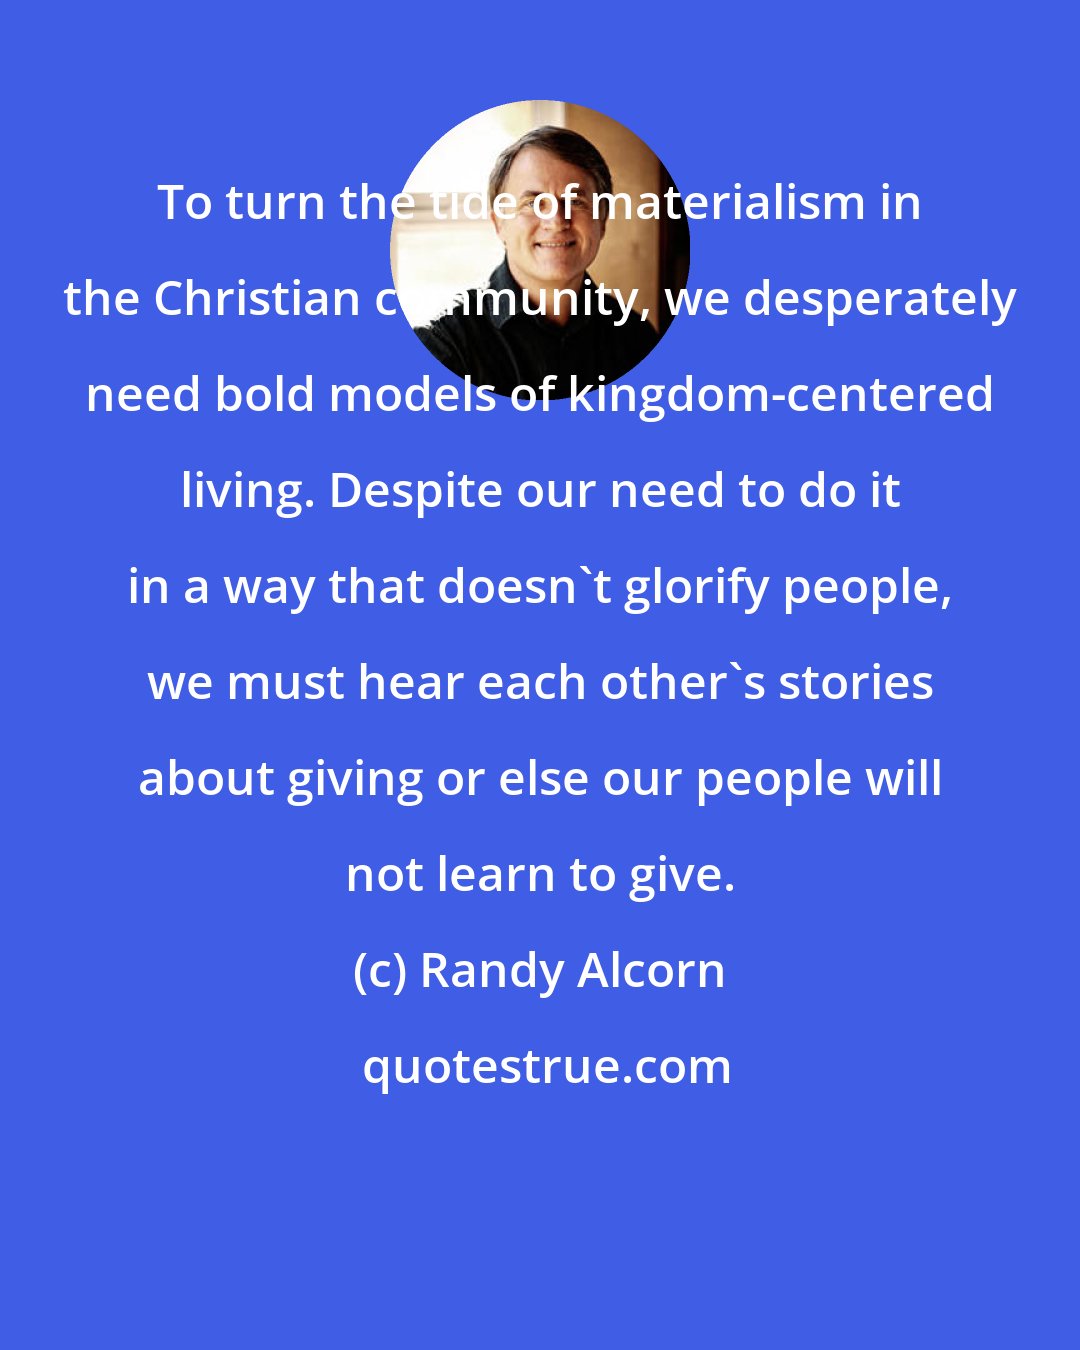 Randy Alcorn: To turn the tide of materialism in the Christian community, we desperately need bold models of kingdom-centered living. Despite our need to do it in a way that doesn't glorify people, we must hear each other's stories about giving or else our people will not learn to give.